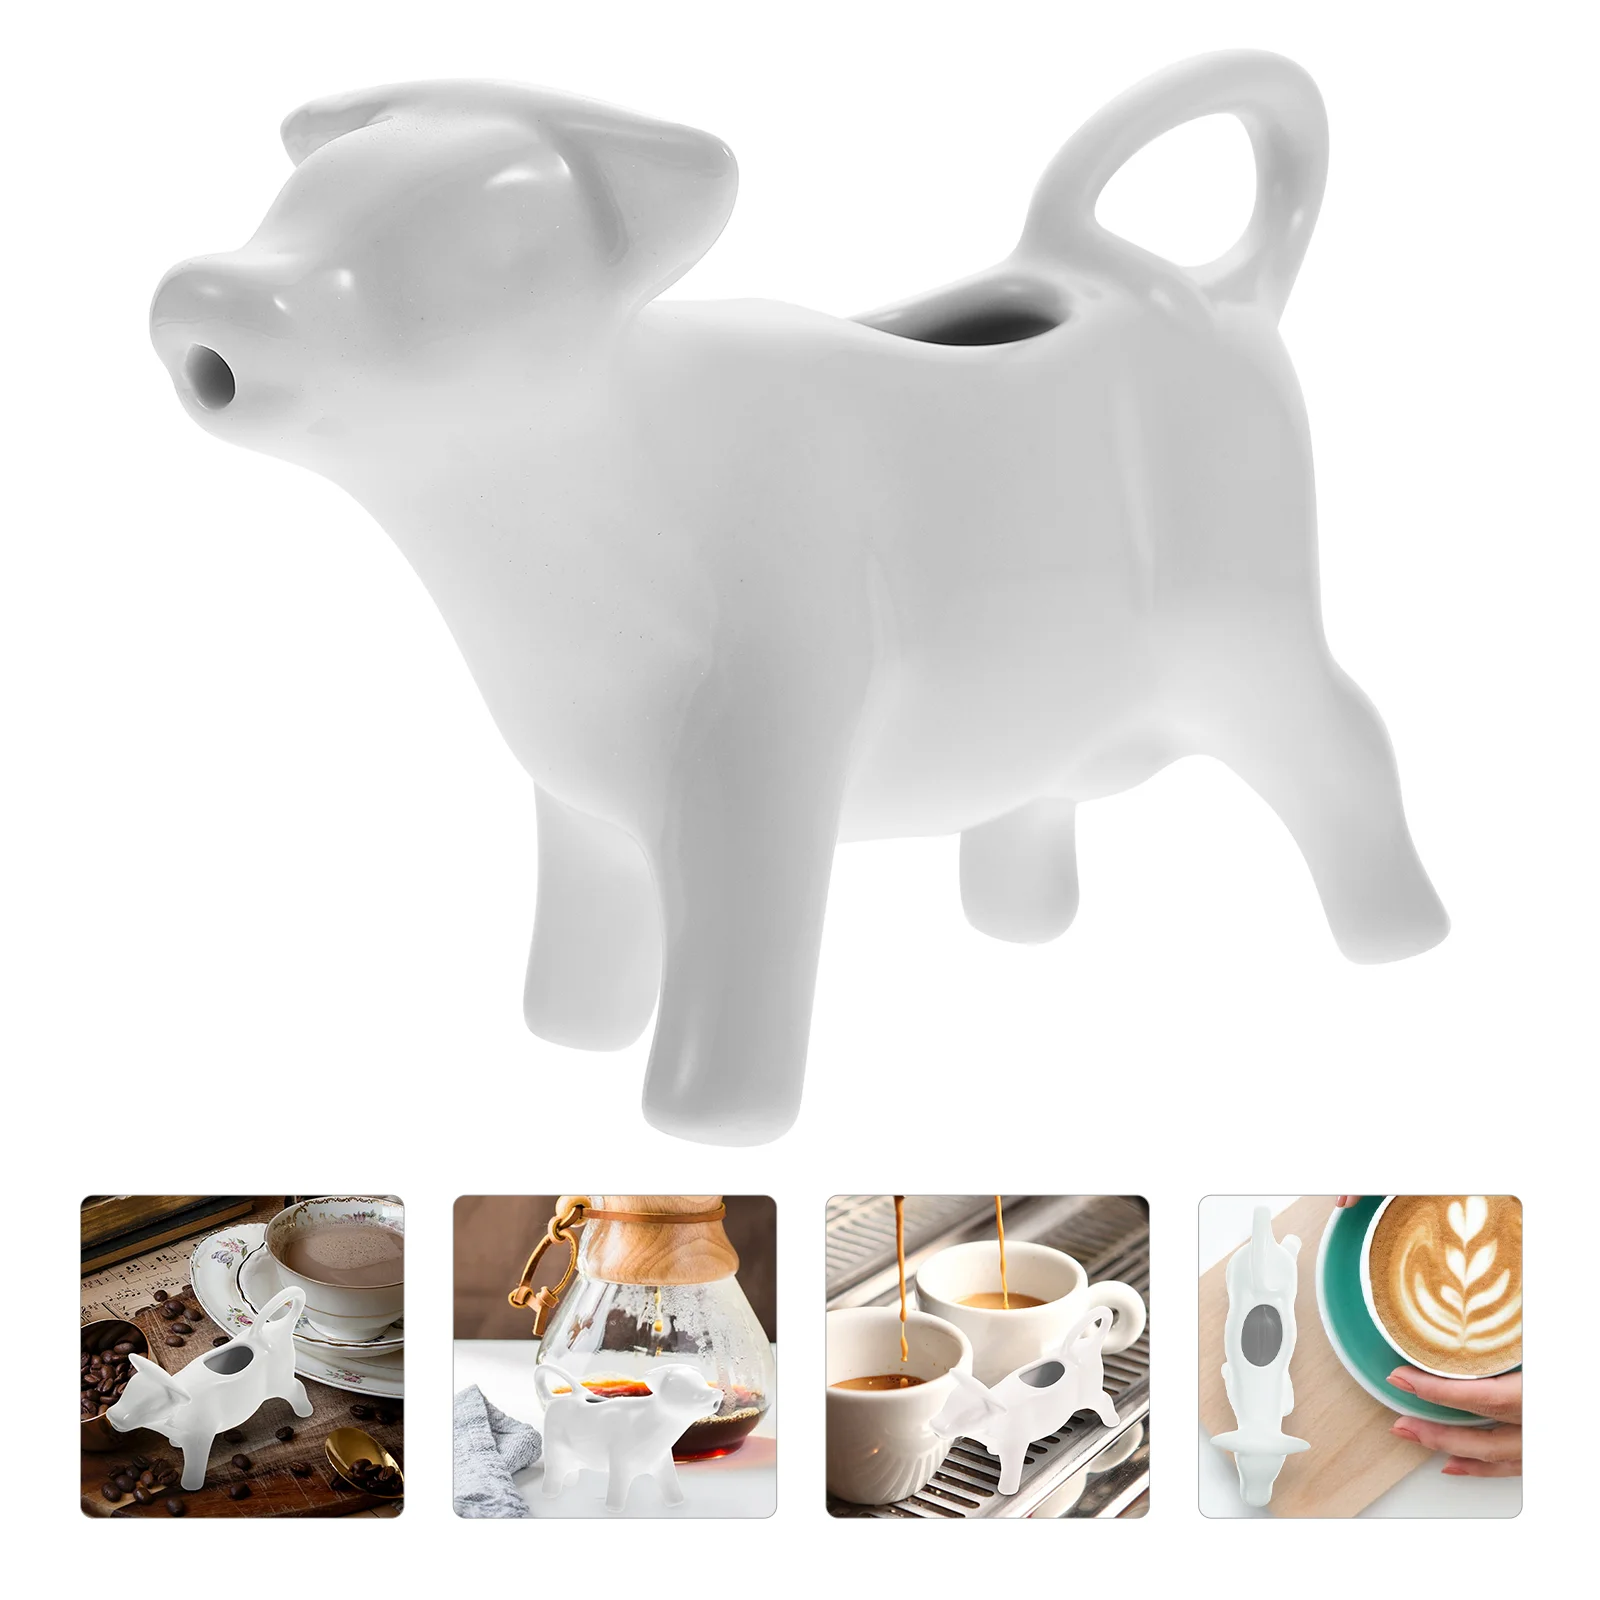 

Pitcher Creamer Ceramic Jug Cup Sauce Coffee Cow Gravy Dispenser Frothing Pourer Miniservingfrother Boat Container Bowl